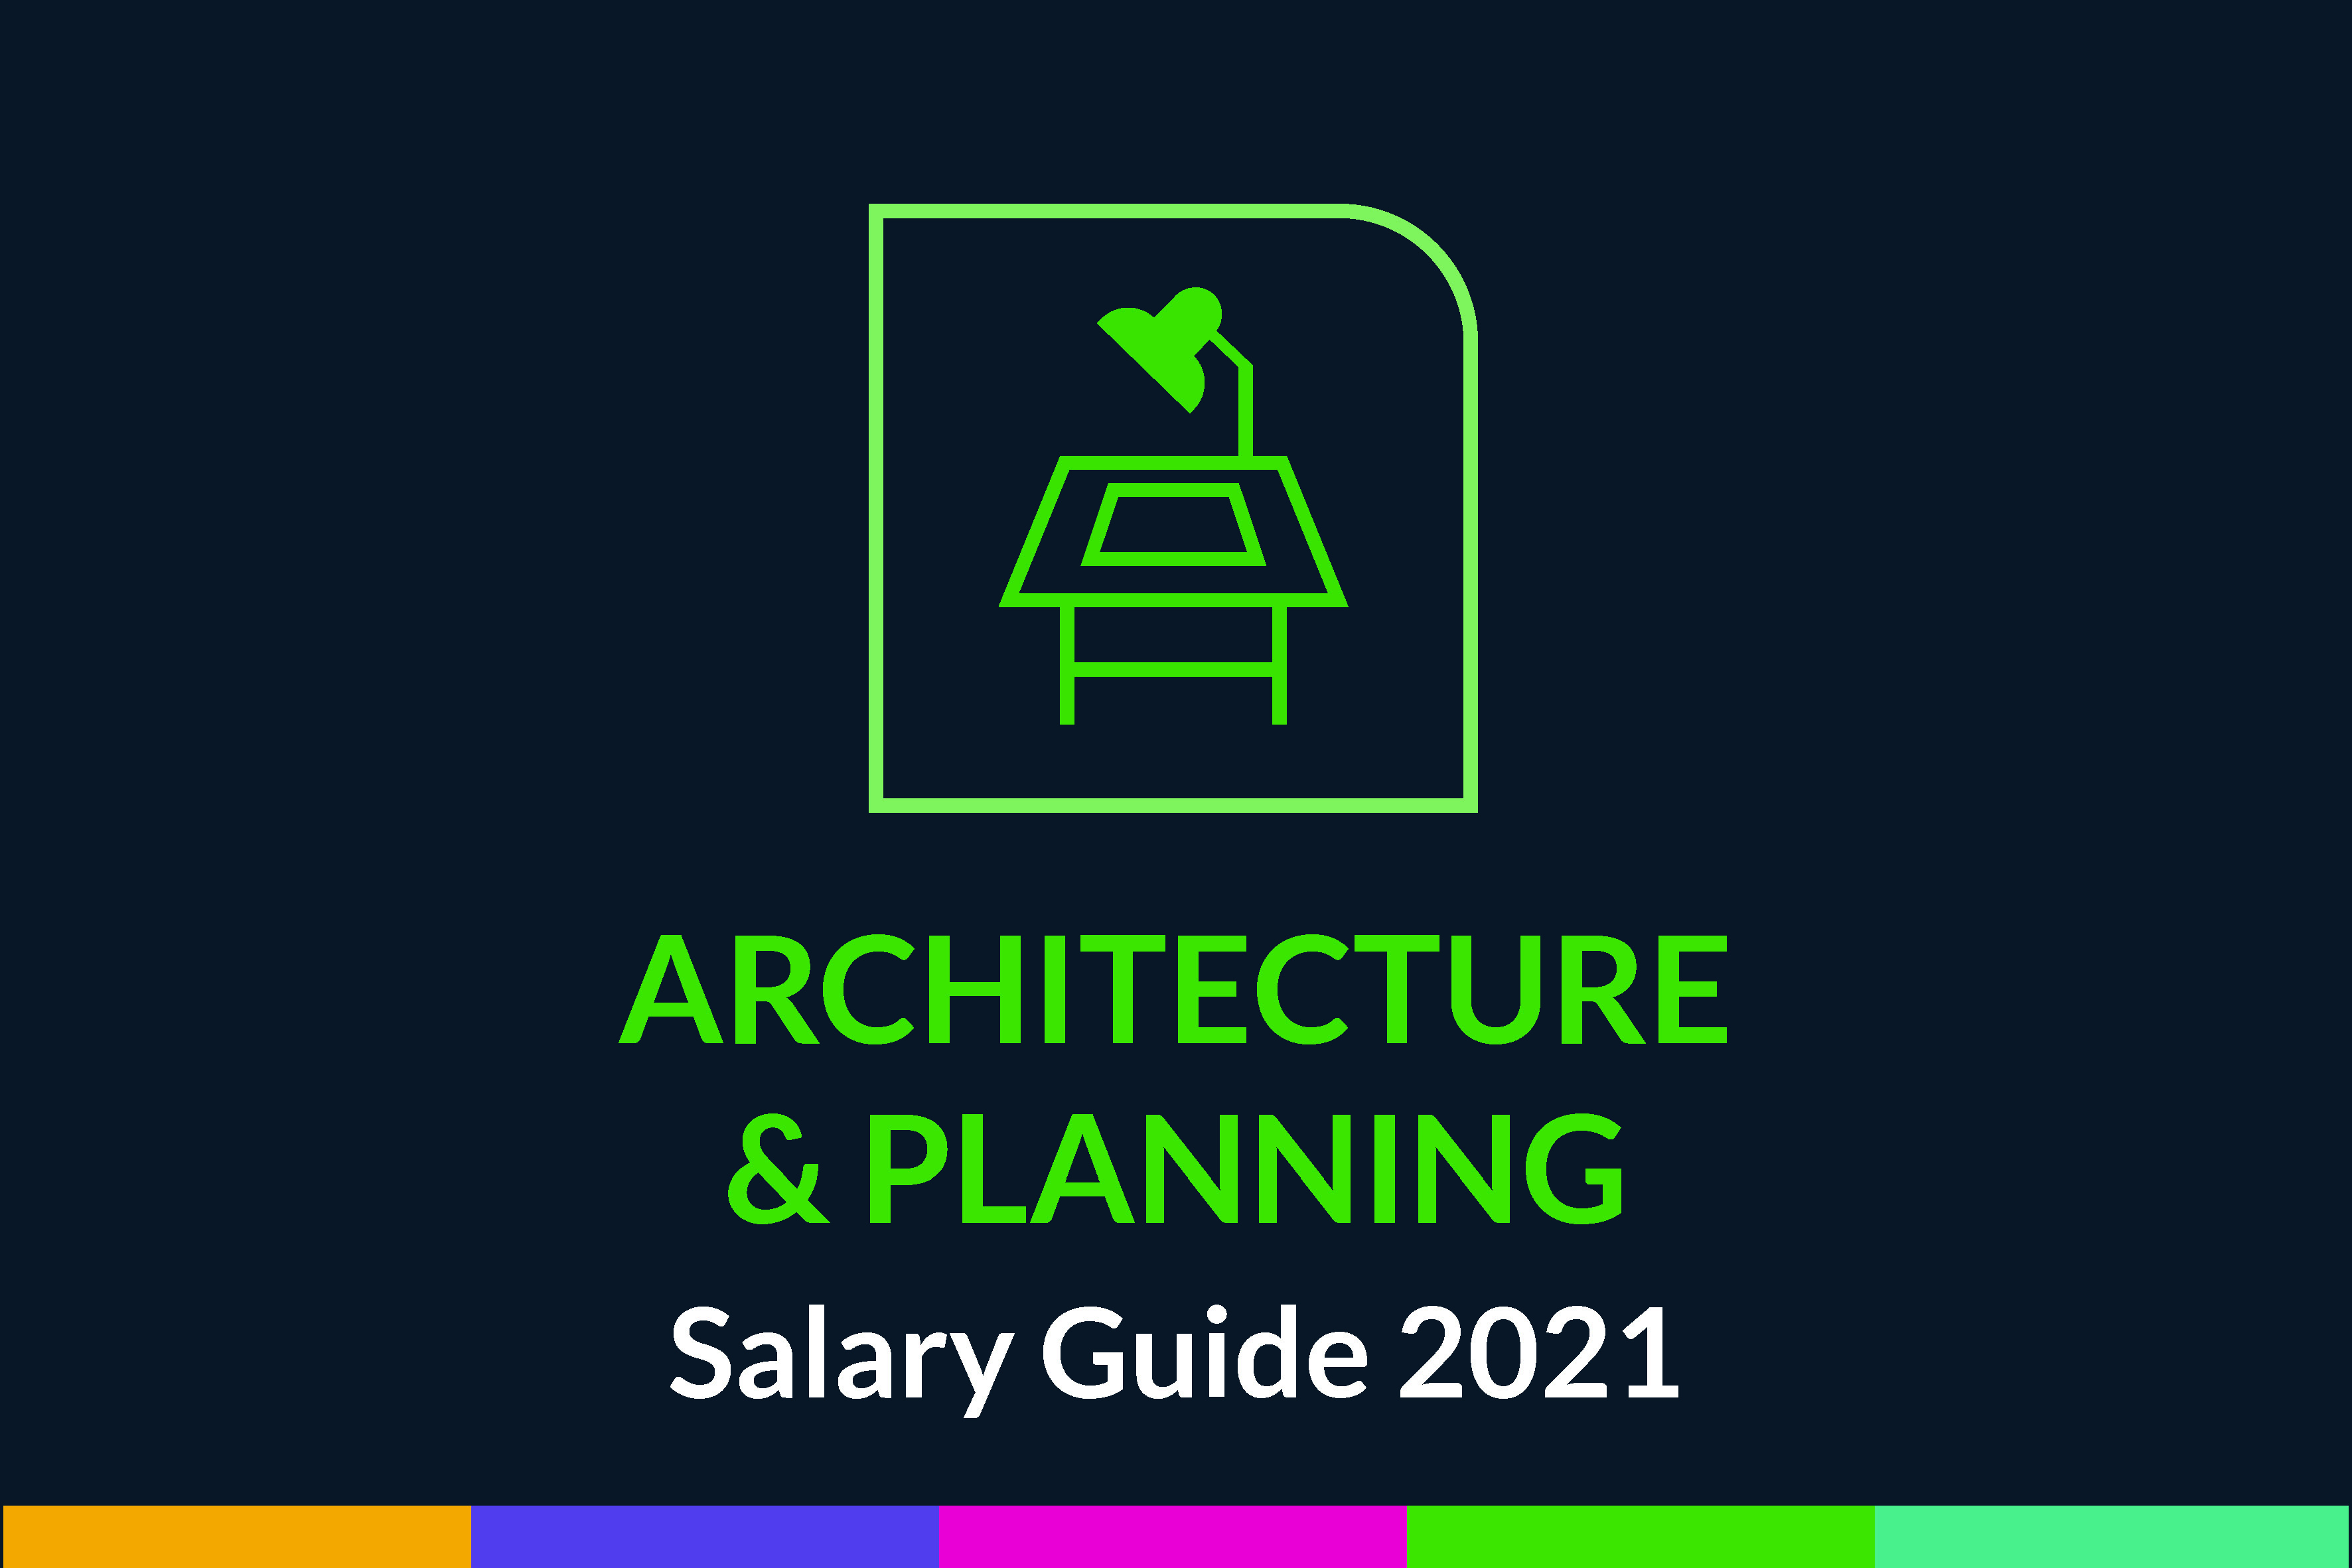 Architecture & Planning Salary Guide